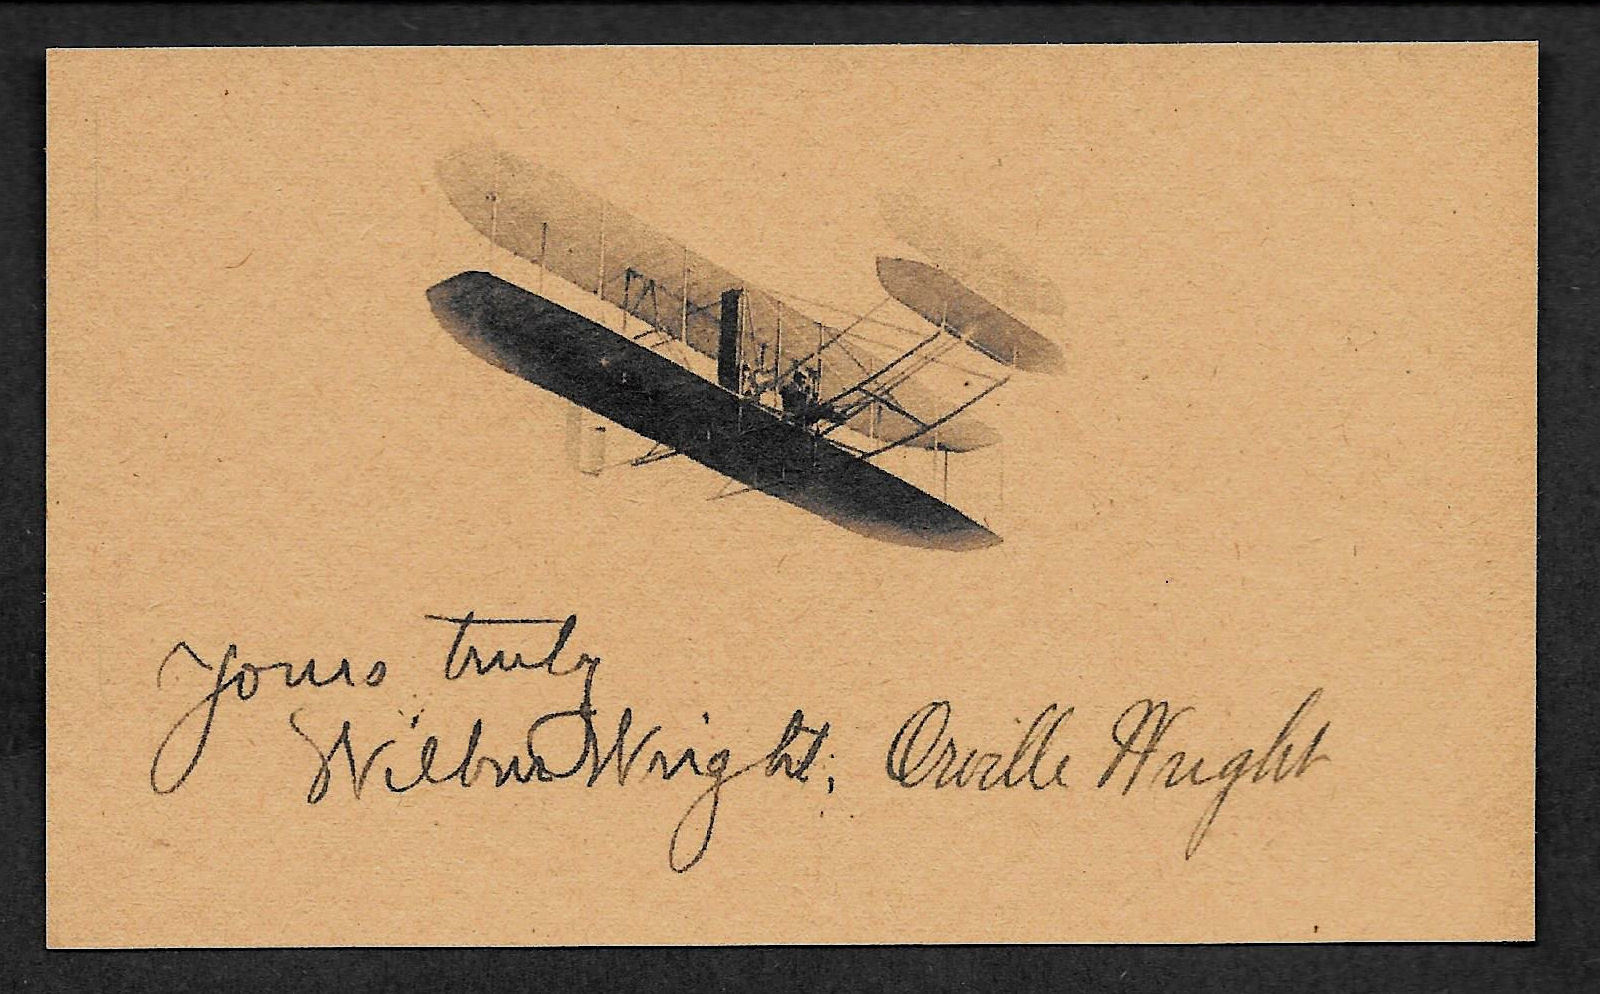 Wright Brothers Autograph Reprint On Genuine Original Period 1900s 3X5 Card PH